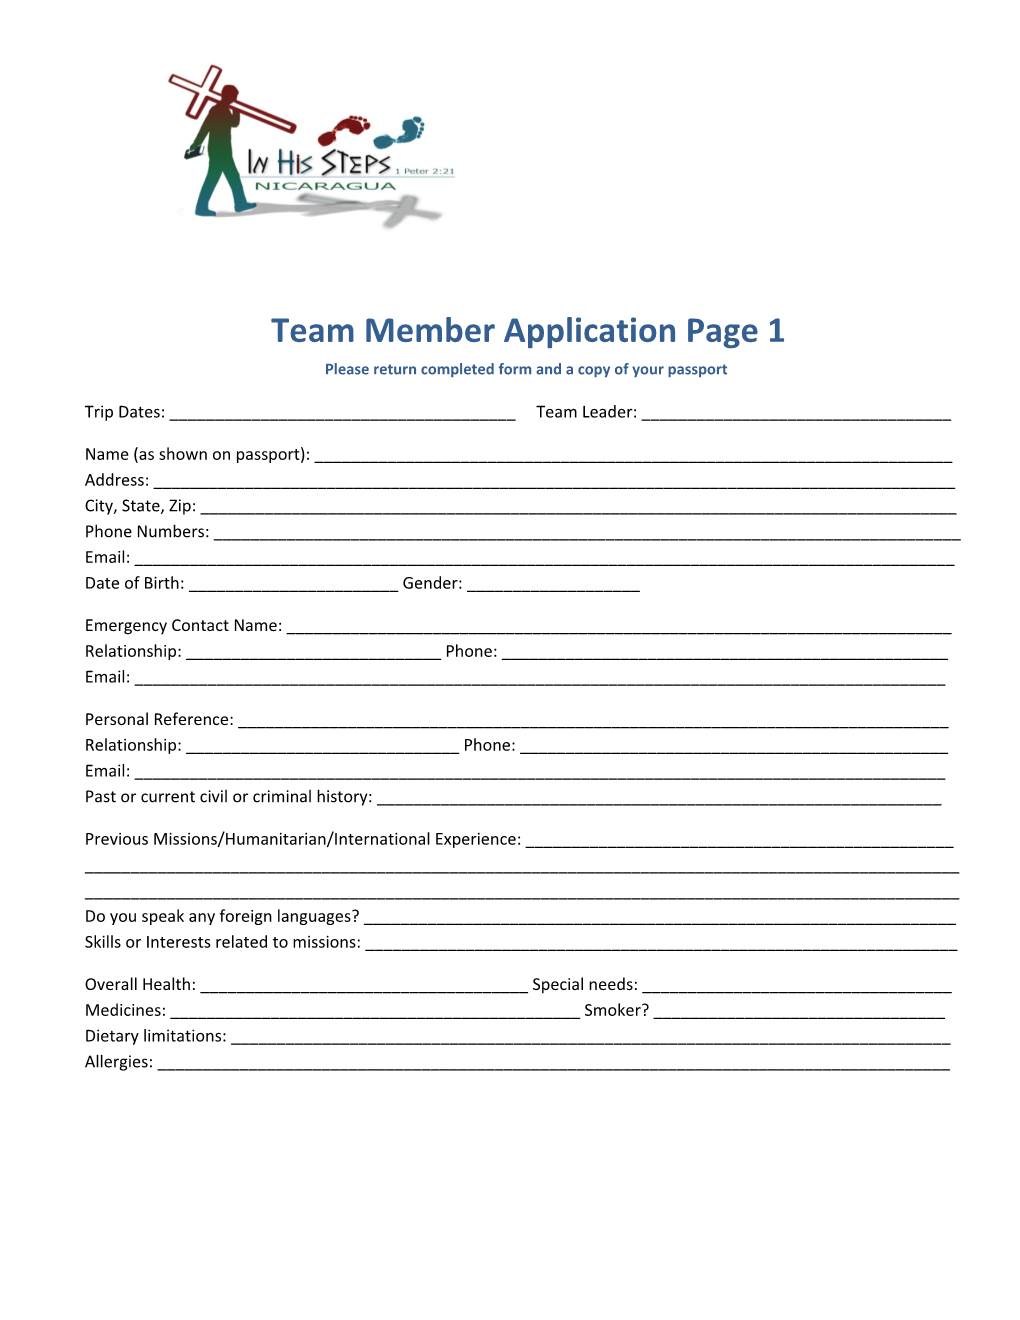 Team Member Application Page 1 Please Return Completed Form and a Copy of Your Passport